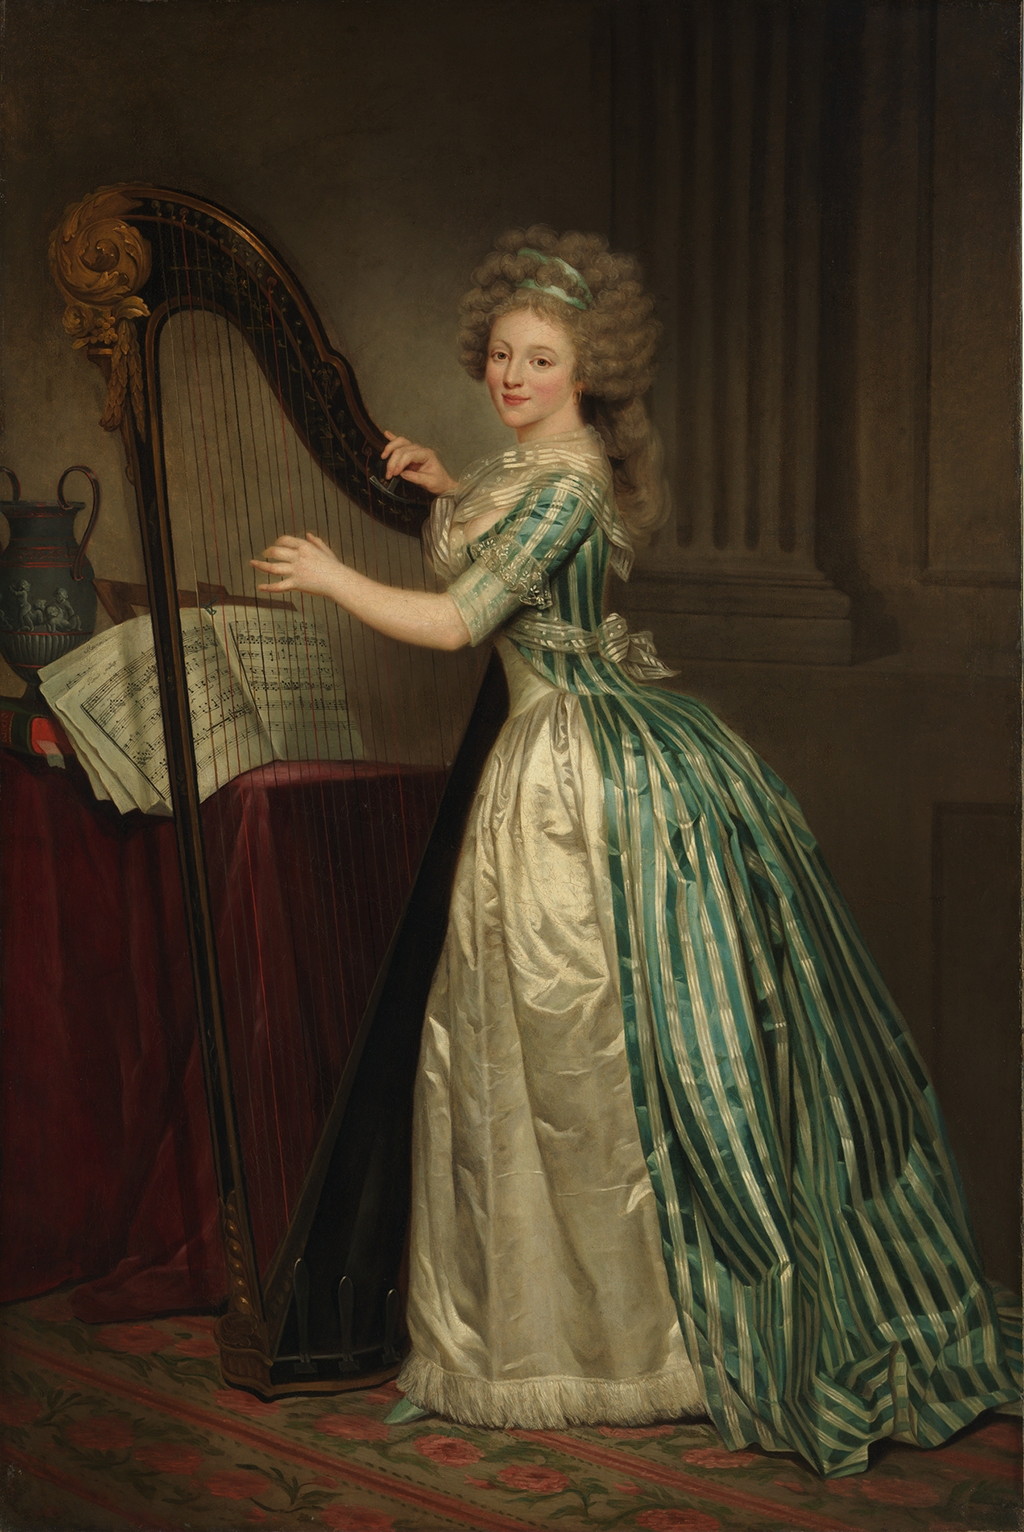 A full-length painting of a woman standing before a black harp. She wears a green and beige striped dress and has powdered hair tied up in a green ribbon. She strums the strings of the tall black harp with gold accents. Behind the harp is a table draped with a red velvet cloth upon which is a black Grecian vase and sheets of music. She stands on a rug that patterned with red flowers and red stripes.